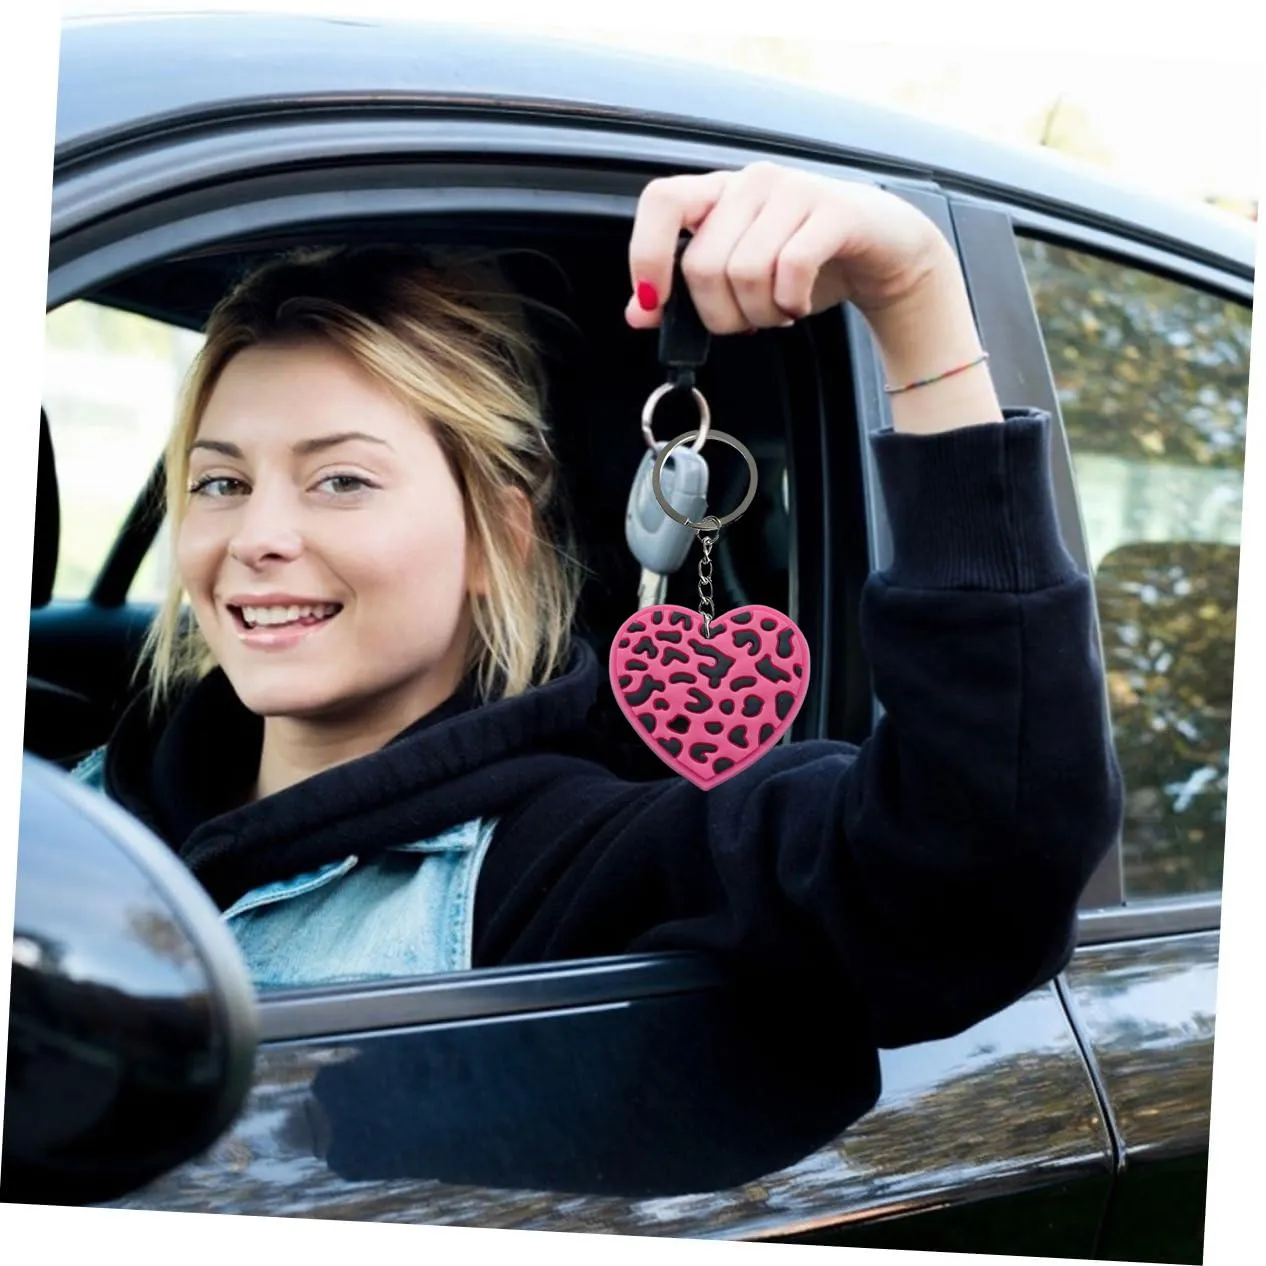 spotted love keychain key chain for girls keychains women keyring backpacks suitable schoolbag classroom prizes purse handbag charms